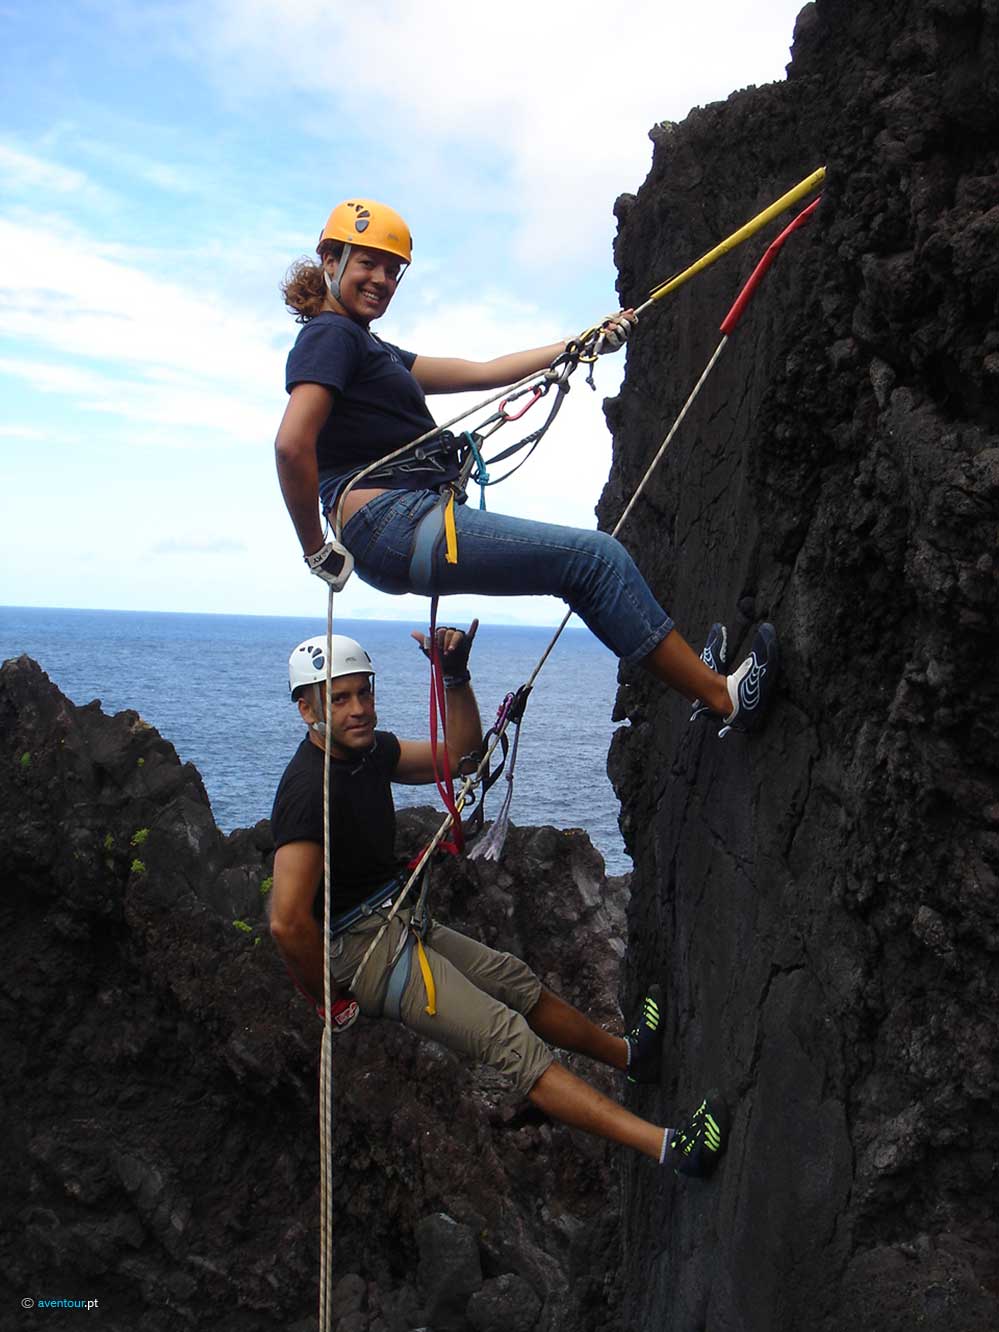 Abseiling in São Jorge Island in the Azores